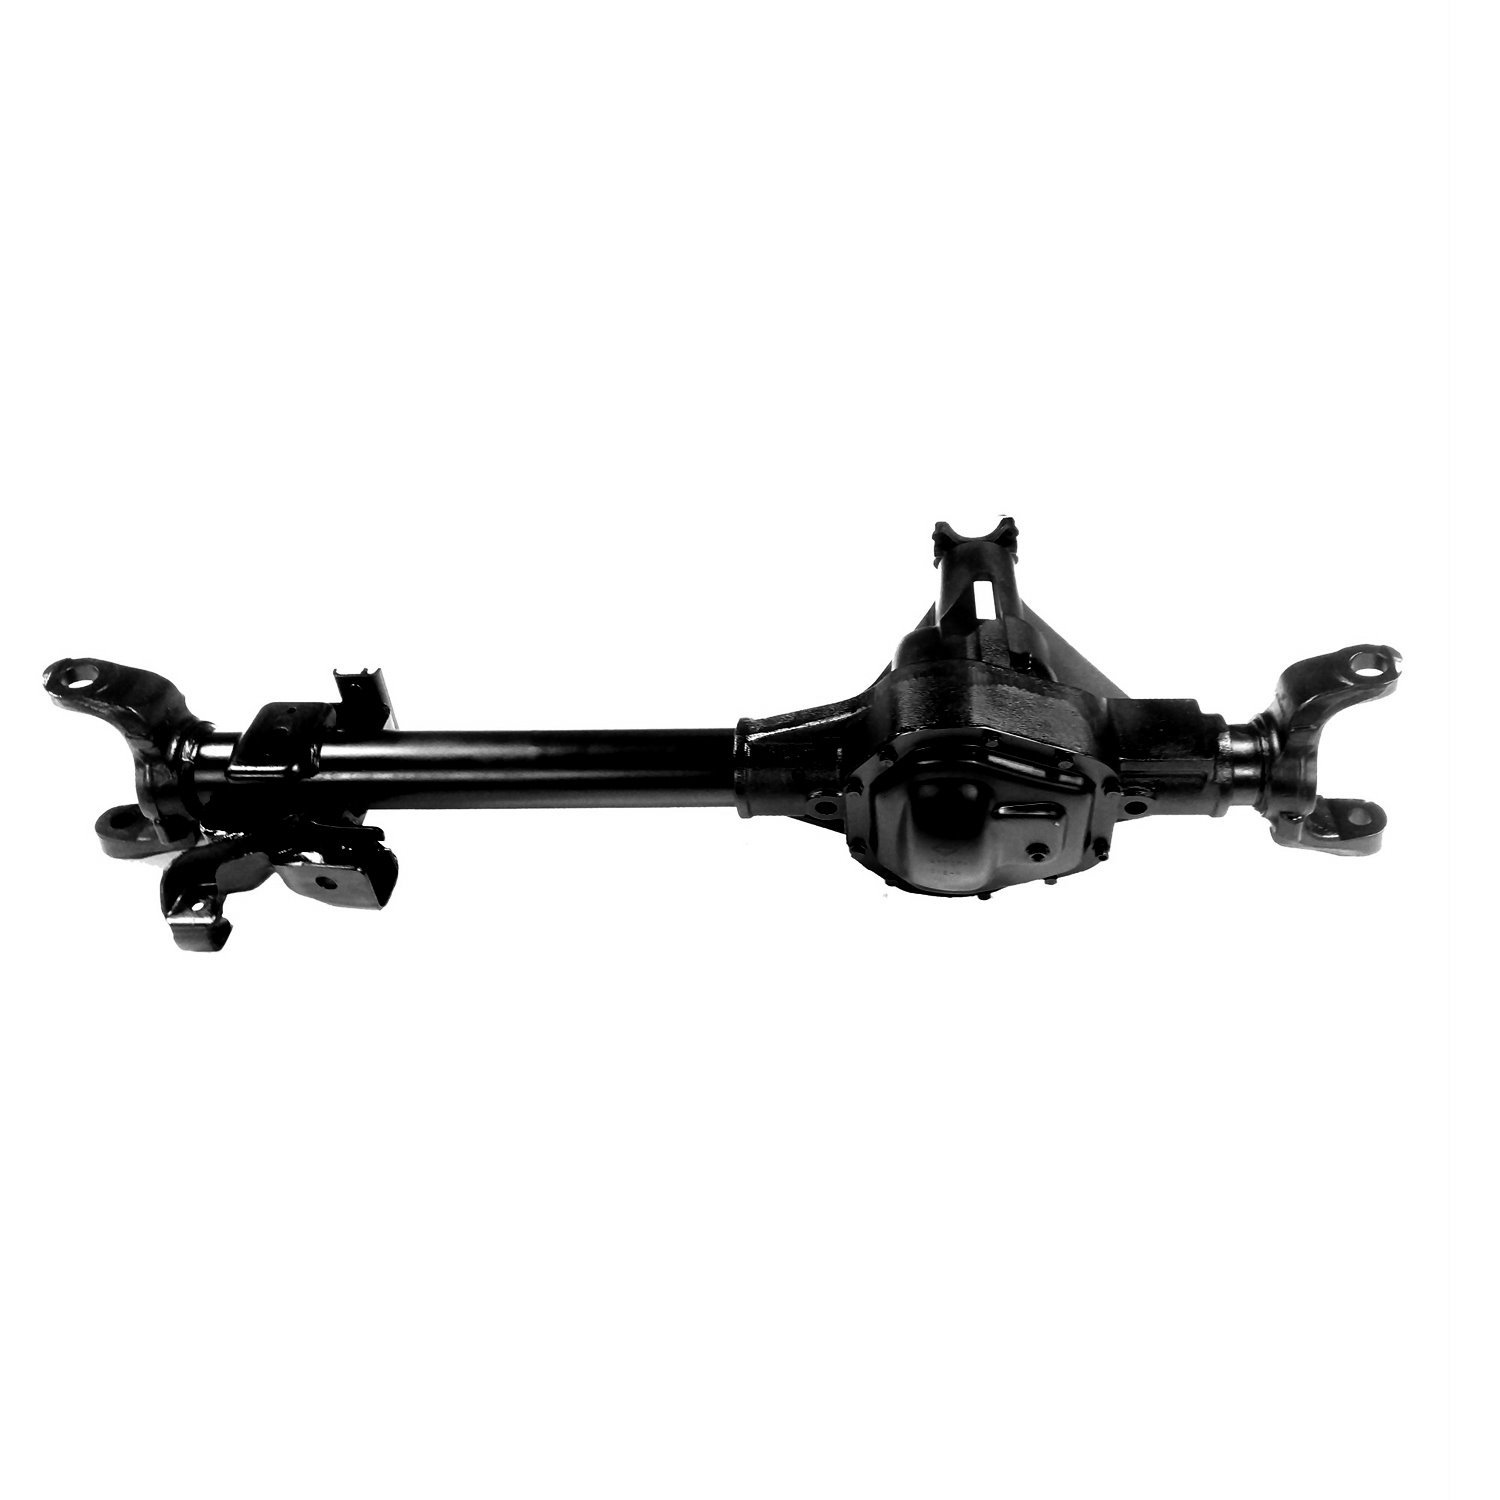 RAA434-128D Complete Axle Assembly for Dana 60 11-12 Ford F250 4.3